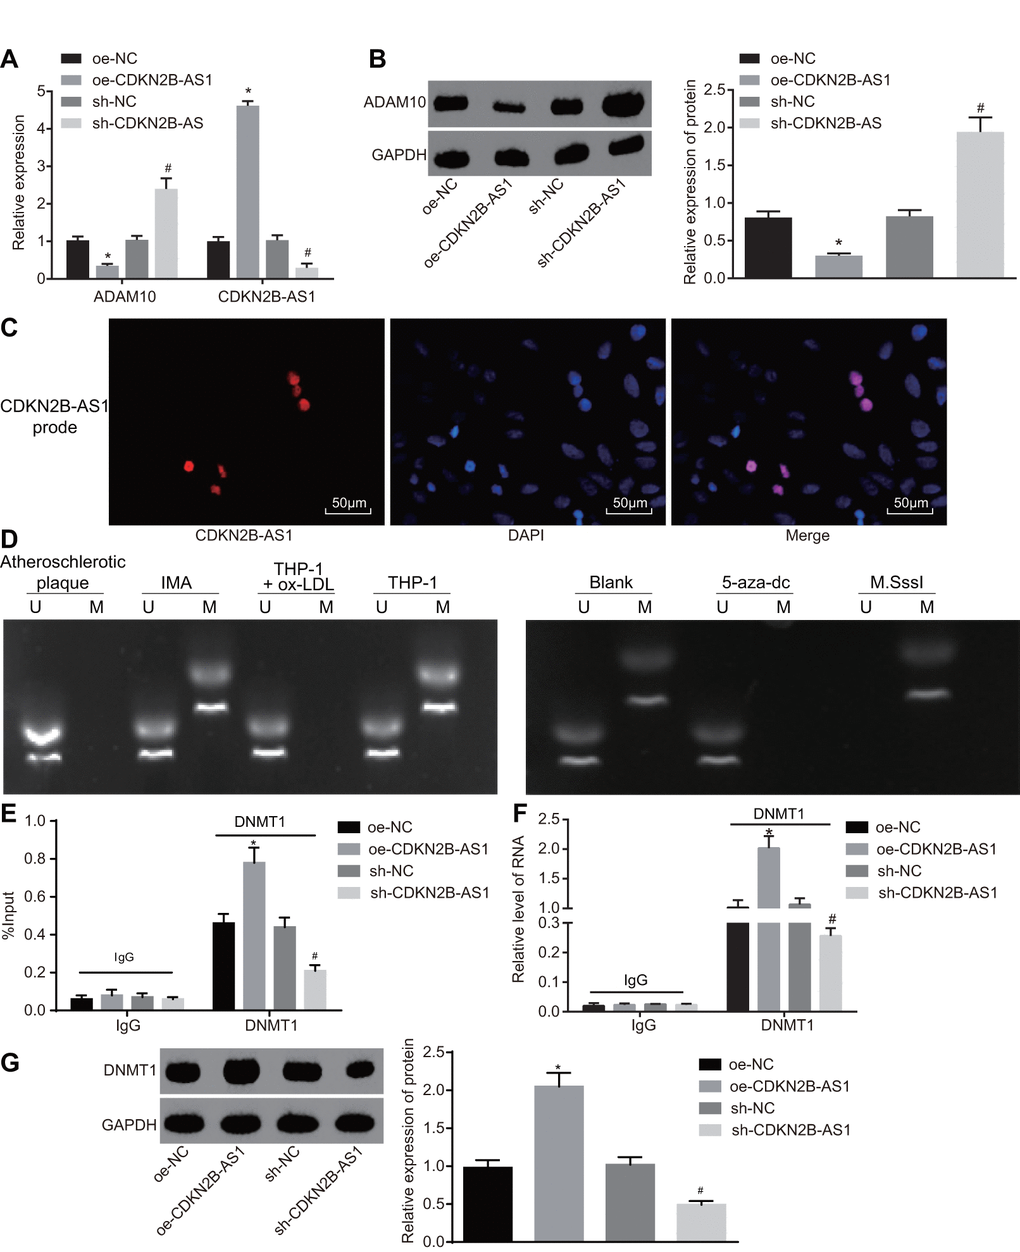 CDKN2B-AS1 promotes ADAM10 methylation by recruiting DNMT1. (A) the expression of CDKN2B-AS1 and transcription level of ADAM10 in cells infected with lentiviral vector expressing oe-CDKN2B-AS1 or sh-CDKN2B-AS1 determined by RT-qPCR; (B) Western blot analysis was used to detect the protein band and level of ADAM10 in cells infected with lentiviral vector expressing oe-CDKN2B-AS1 or sh-CDKN2B-AS1; (C) FISH was used to detect CDKN2B-AS1 localization in cells (× 200); (D) MS-PCR was used to detect the electrophoresis band of ADAM10 methylation level in atherosclerotic plaque, IMA tissues and ox-LDL-exposed THP-1 macrophages or ox-LDL-exposed THP-1 macrophages treated with 5-aza-dc or M.SssI; (E) CHIP assay to detect the output percentage of ADAM10 in cells infected with lentiviral vector expressing oe-CDKN2B-AS1 or sh-CDKN2B-AS1; (F) RIP assay to detect the output percentage of CDKN2B-AS1 in cells infected with lentiviral vector expressing oe-CDKN2B-AS1 or sh-CDKN2B-AS1; (G) RNA pull down to detect the DNMT1 protein pulled down by lncRNA CDKN2B-AS1 in cells infected with lentiviral vector expressing oe-CDKN2B-AS1 or sh-CDKN2B-AS1; In panel D, U represents the un-methylated lane, and M is representative of the methylation lane; * p vs. the oe-NC group; # p vs. the sh-NC group; the measurement data were expressed in the form of mean ± standard deviation and analyzed by one-way ANOVA, the experiment was repeated 3 times; THP-1, the human monocytic leukemia cell line; RT-qPCR, reverse transcription quantitative polymerase chain reaction; CDKN, cell-dependent kinase inhibitor; ANOVA, analysis of variance; ELISA, enzyme linked immunosorbent assay; RIP, RNA-binding protein immunoprecipitation; FISH, fluorescence in situ hybridization; CHIP, chromatin immunoprecipitation; MS-PCR, methylation-specific PCR.